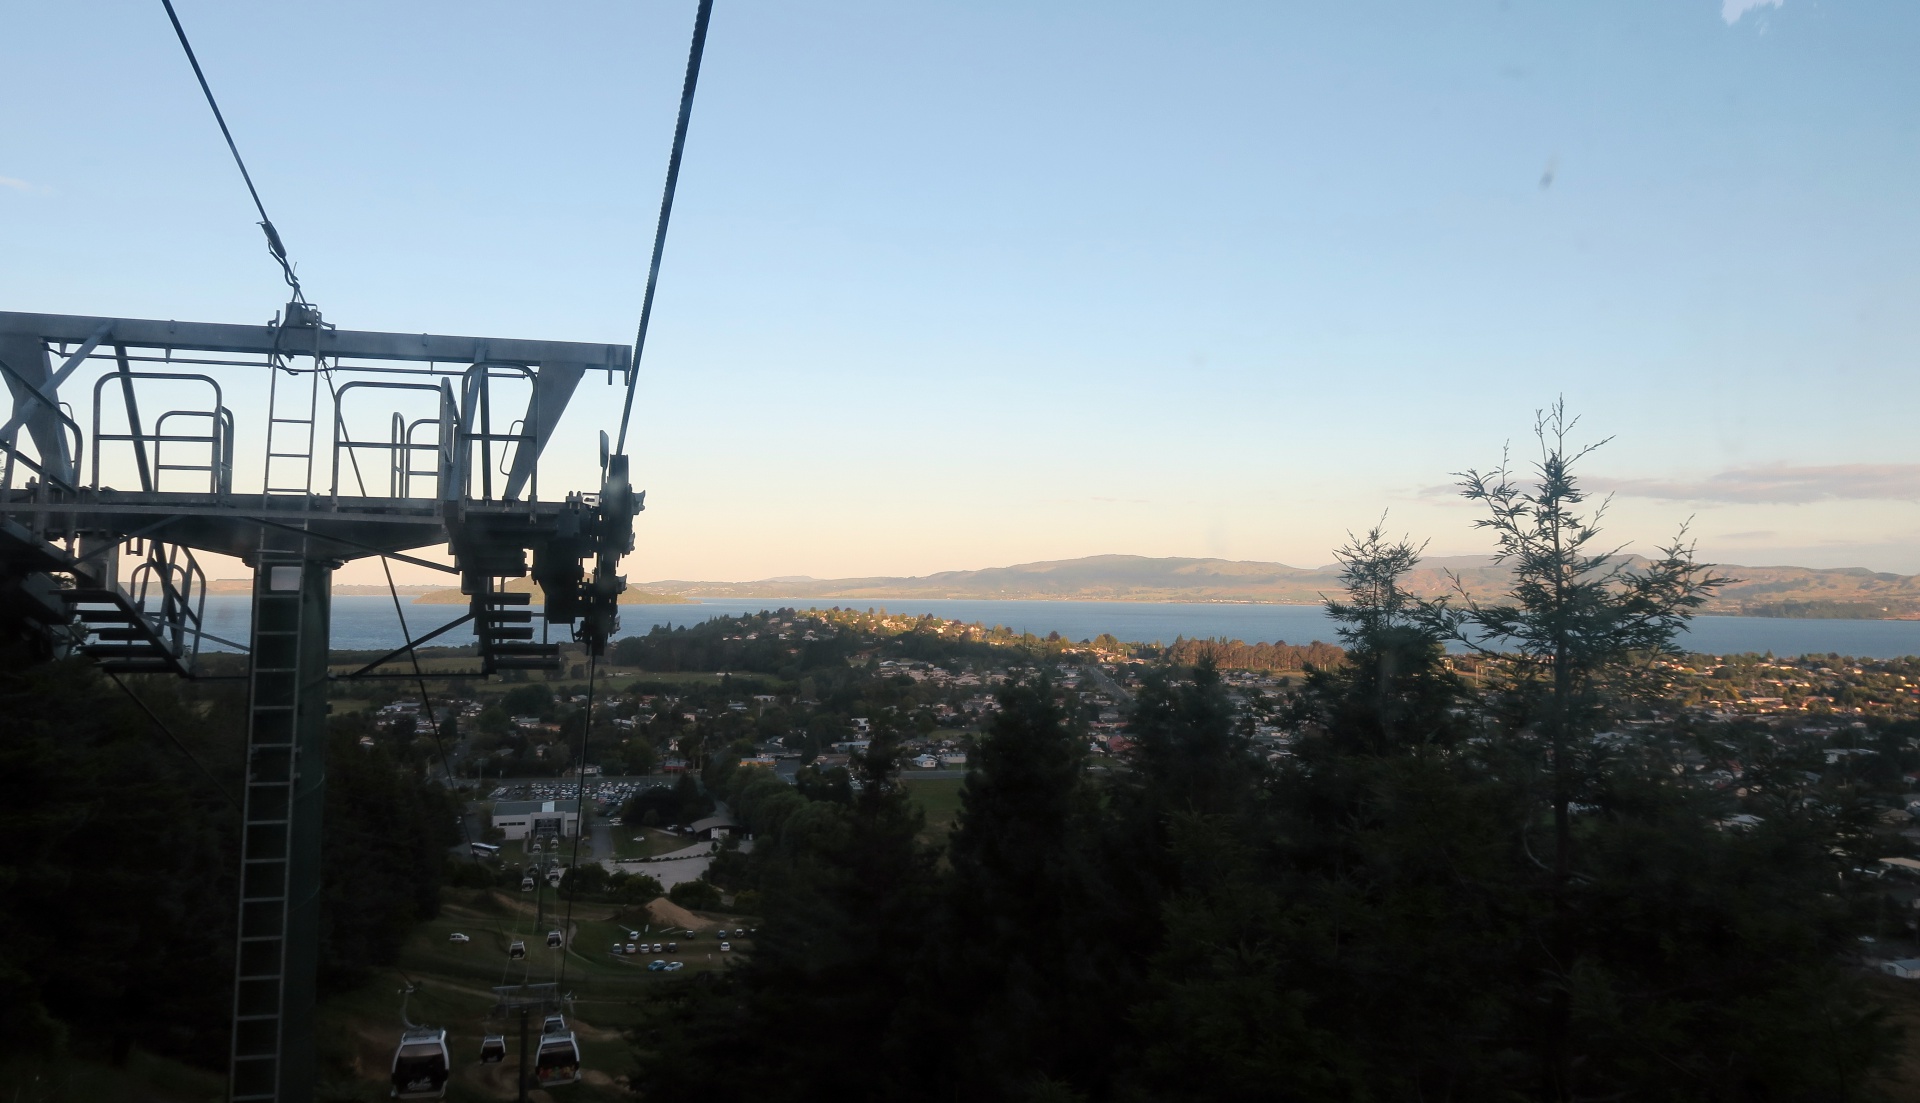 Gondola Ride to the Top of the Hill!